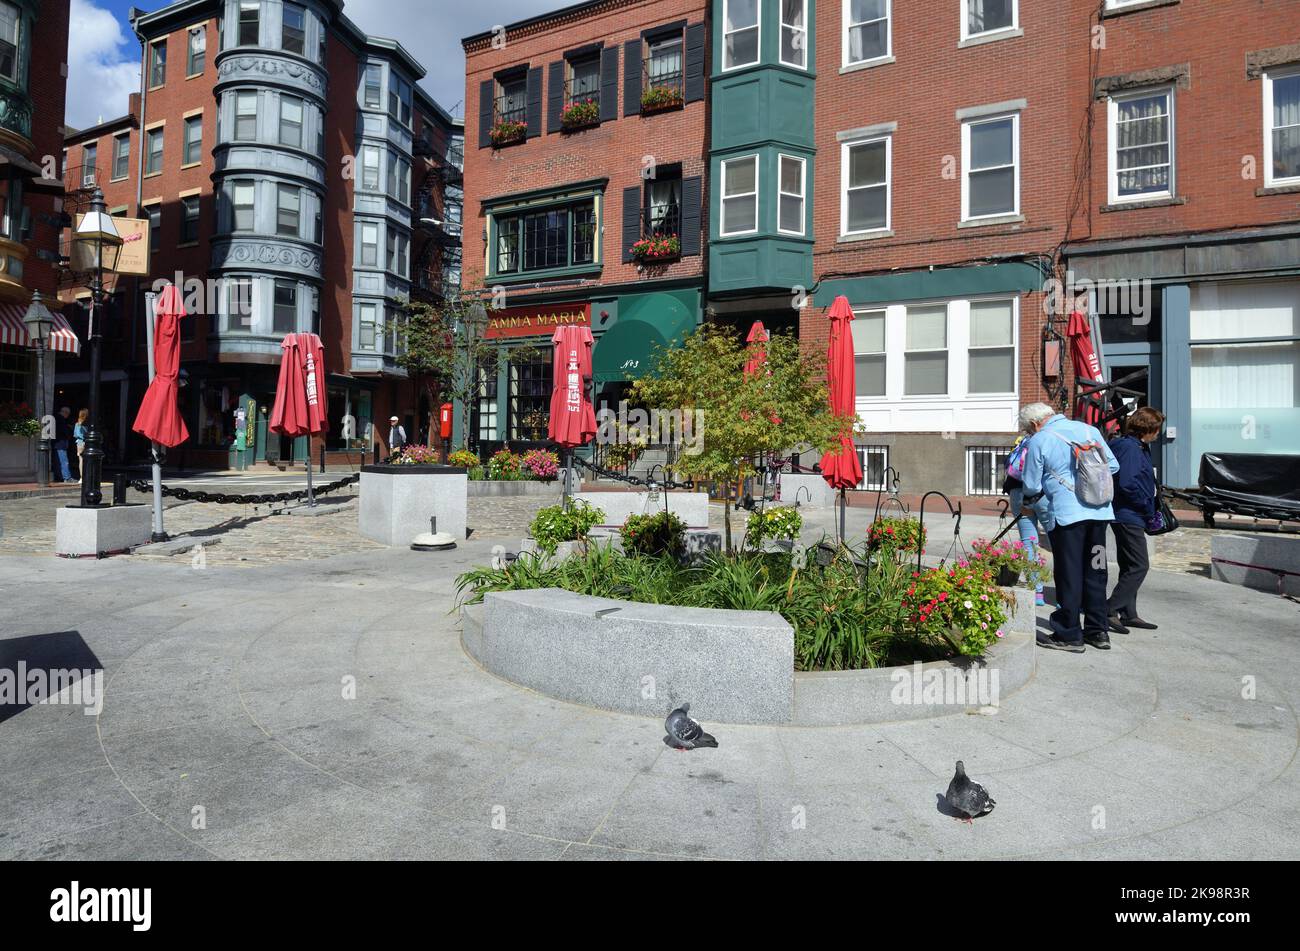 Boston, Massachusetts, USA. North Square in Boston's North End neighborhood. The predominantly Italian-American neighborhood is the oldest in the city. Stock Photo